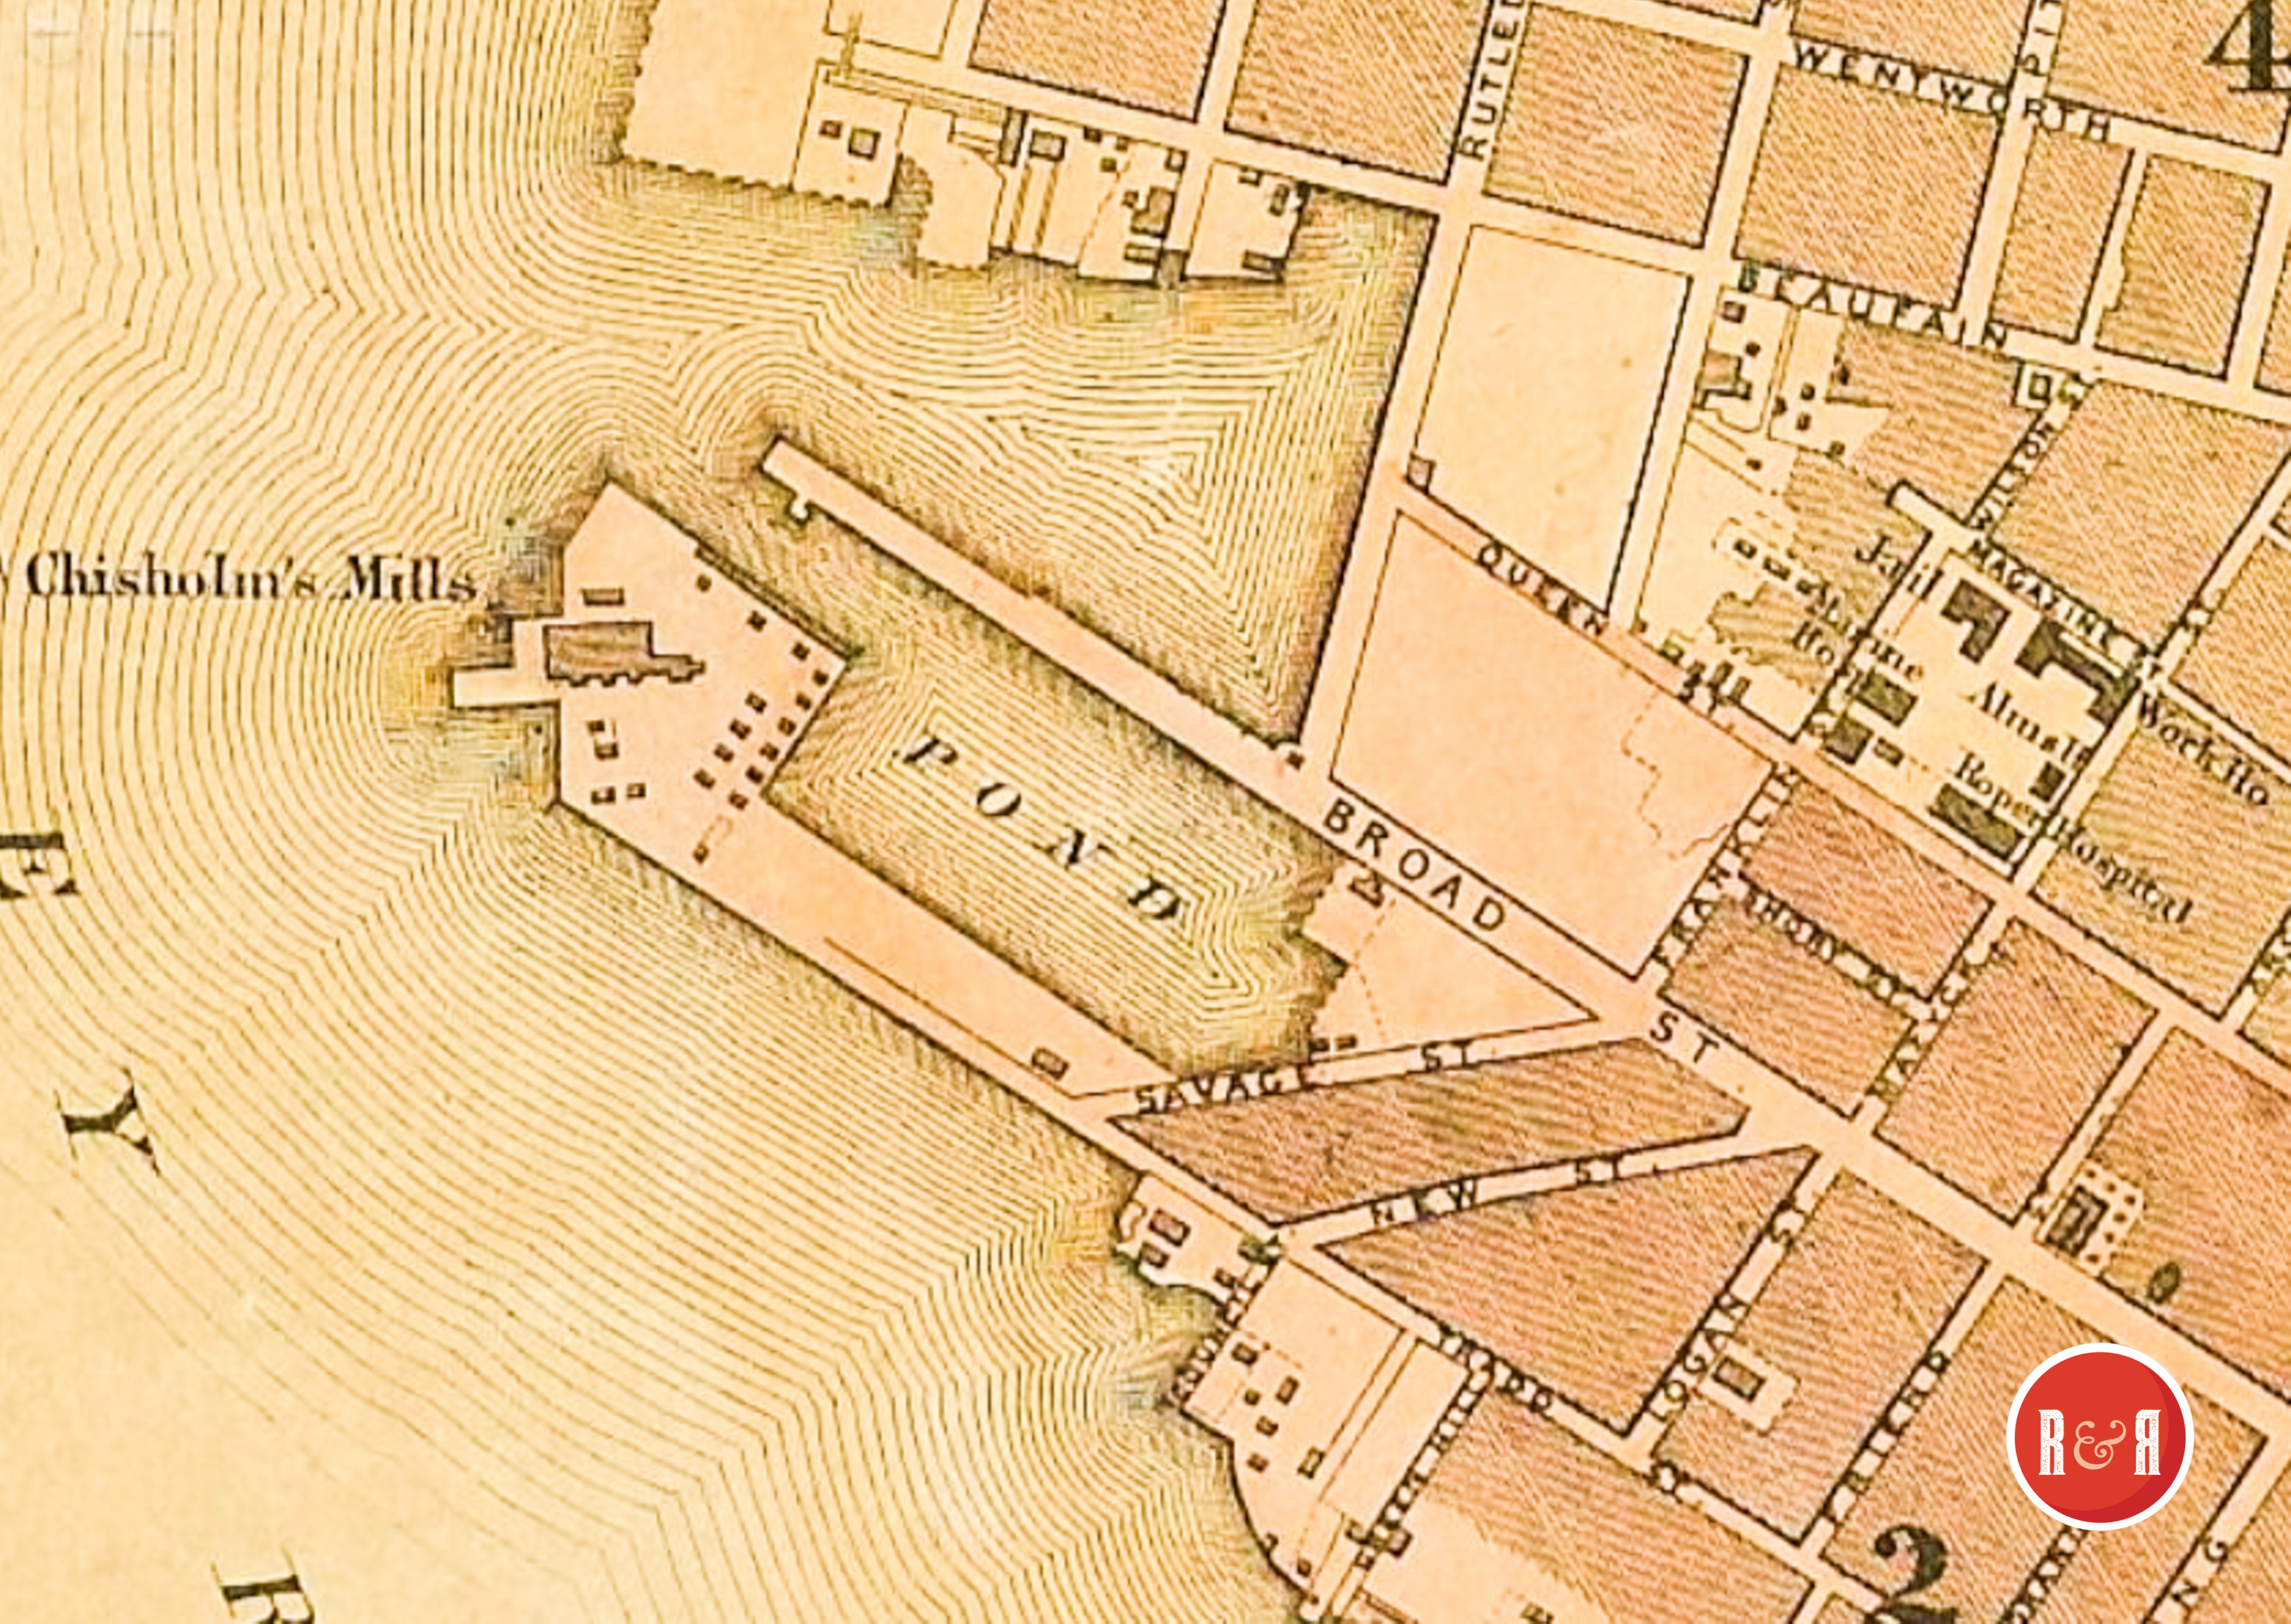 COLTON'S 1854 MAP OF CHISHOLM'S RICE MILL SITE